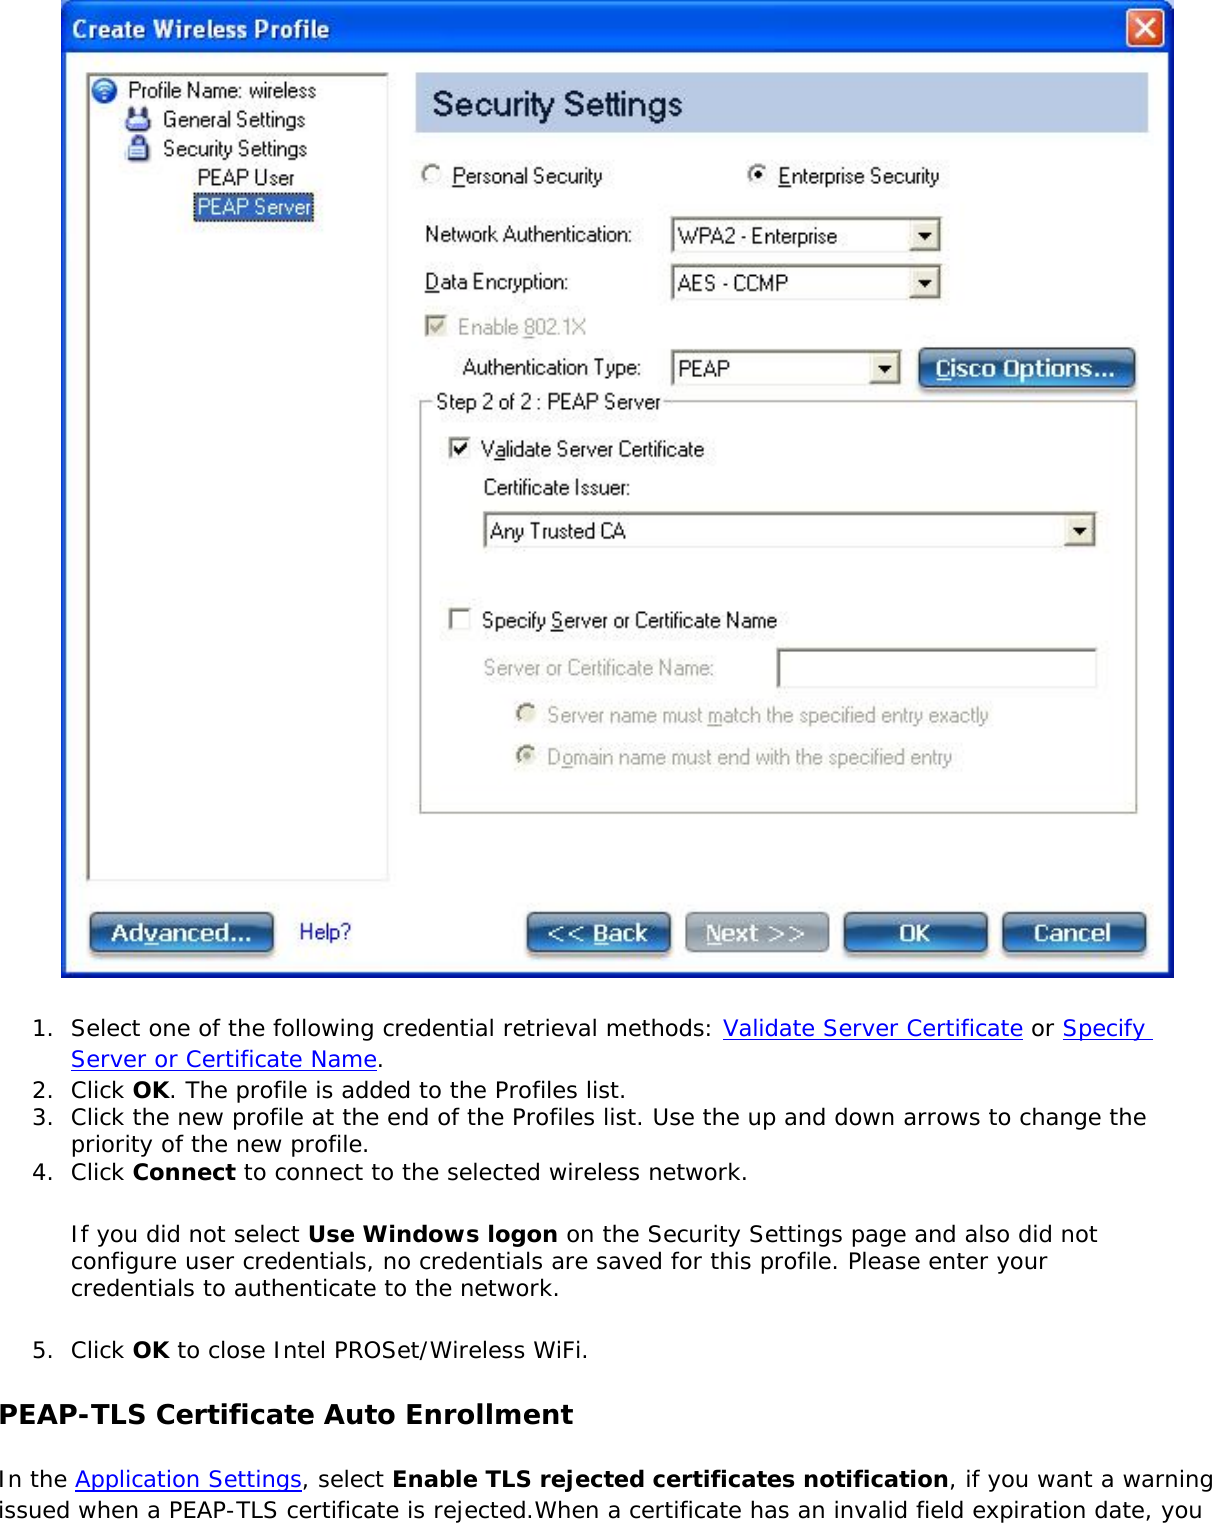  1.  Select one of the following credential retrieval methods: Validate Server Certificate or Specify Server or Certificate Name.2.  Click OK. The profile is added to the Profiles list.3.  Click the new profile at the end of the Profiles list. Use the up and down arrows to change the priority of the new profile.4.  Click Connect to connect to the selected wireless network.If you did not select Use Windows logon on the Security Settings page and also did not configure user credentials, no credentials are saved for this profile. Please enter your credentials to authenticate to the network. 5.  Click OK to close Intel PROSet/Wireless WiFi.PEAP-TLS Certificate Auto EnrollmentIn the Application Settings, select Enable TLS rejected certificates notification, if you want a warning issued when a PEAP-TLS certificate is rejected.When a certificate has an invalid field expiration date, you 